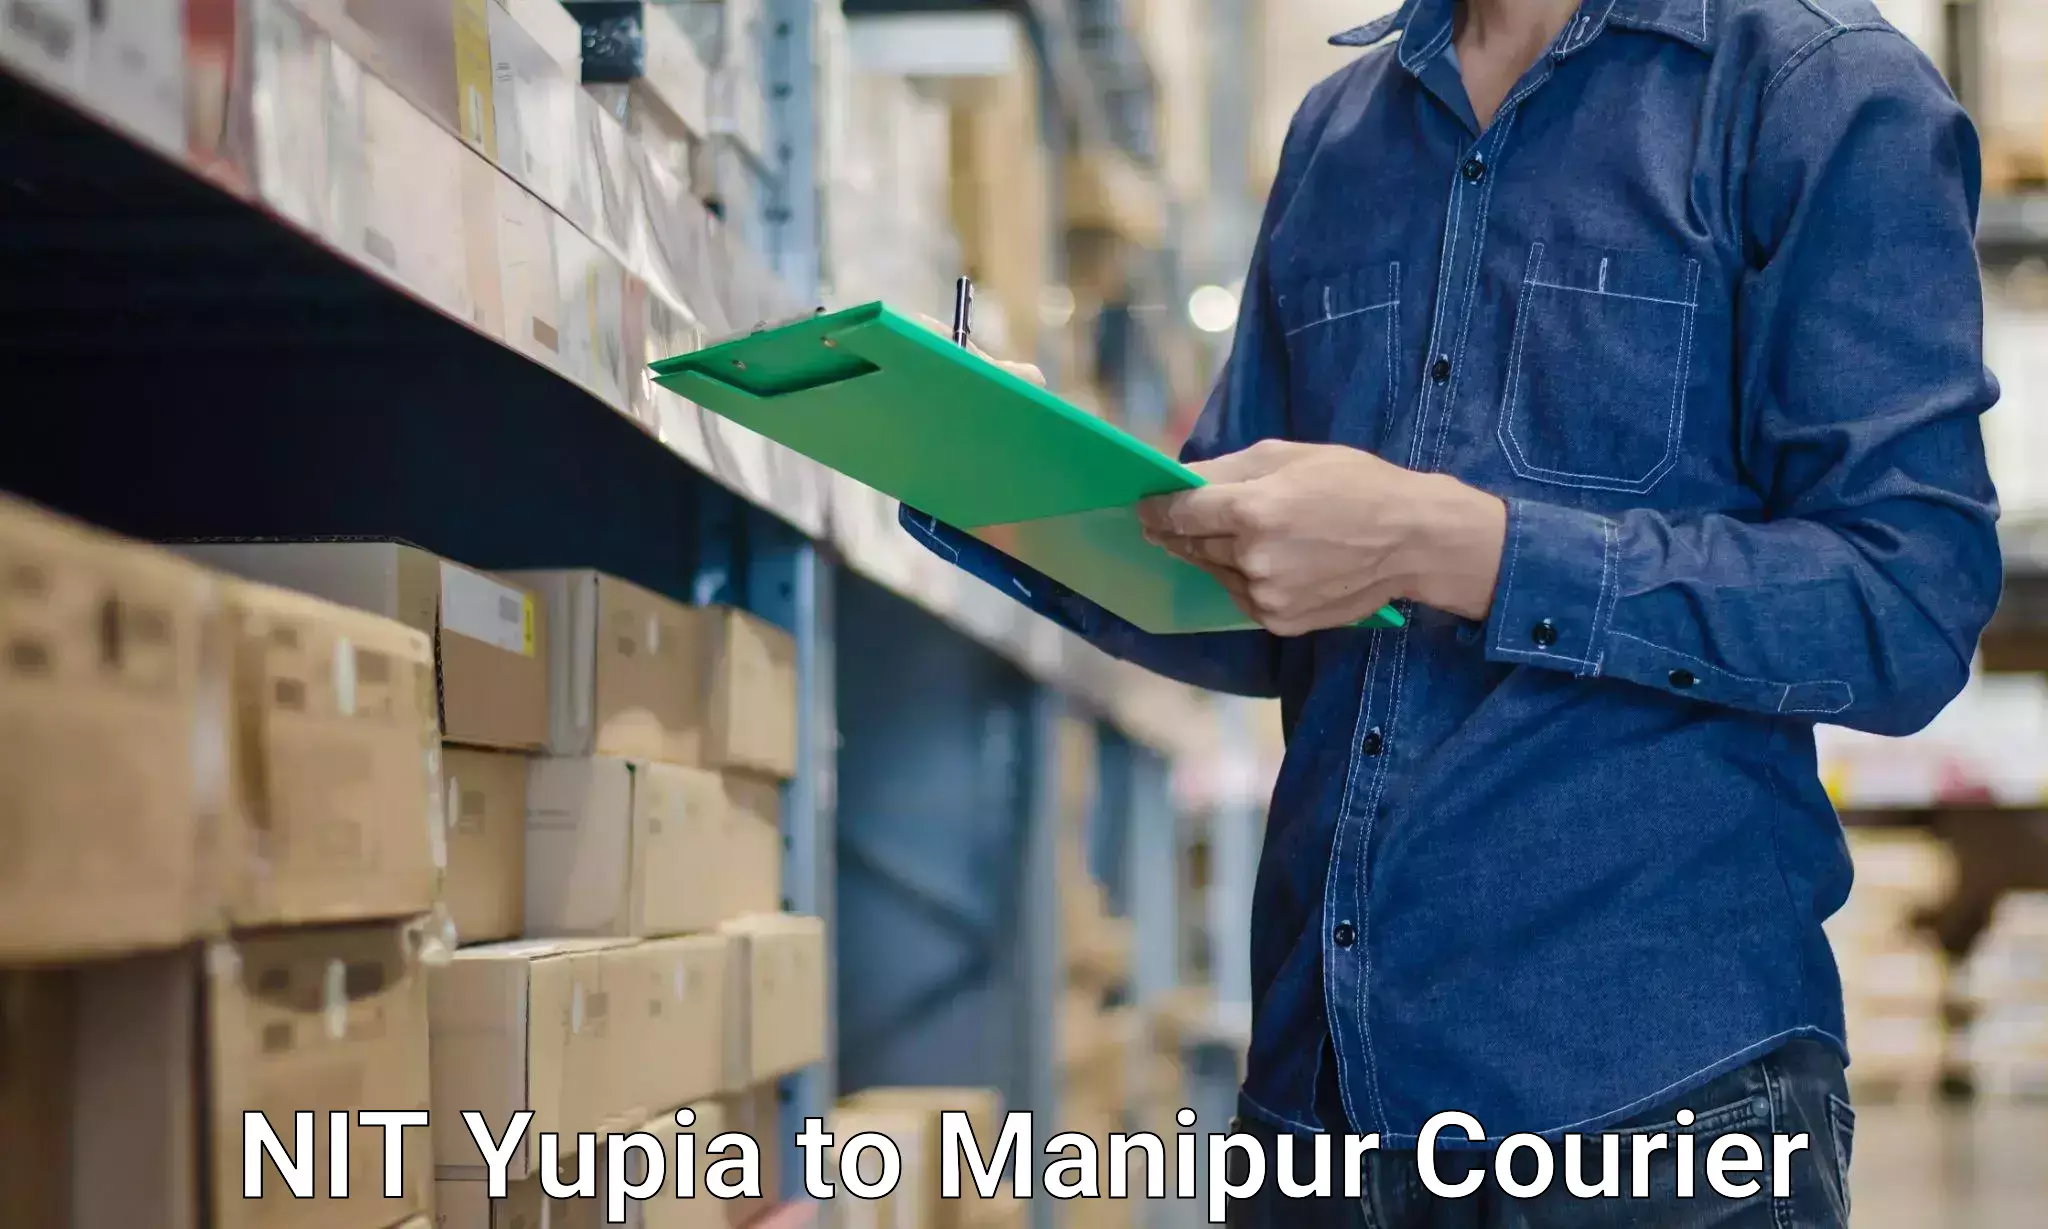 Professional furniture movers NIT Yupia to Manipur